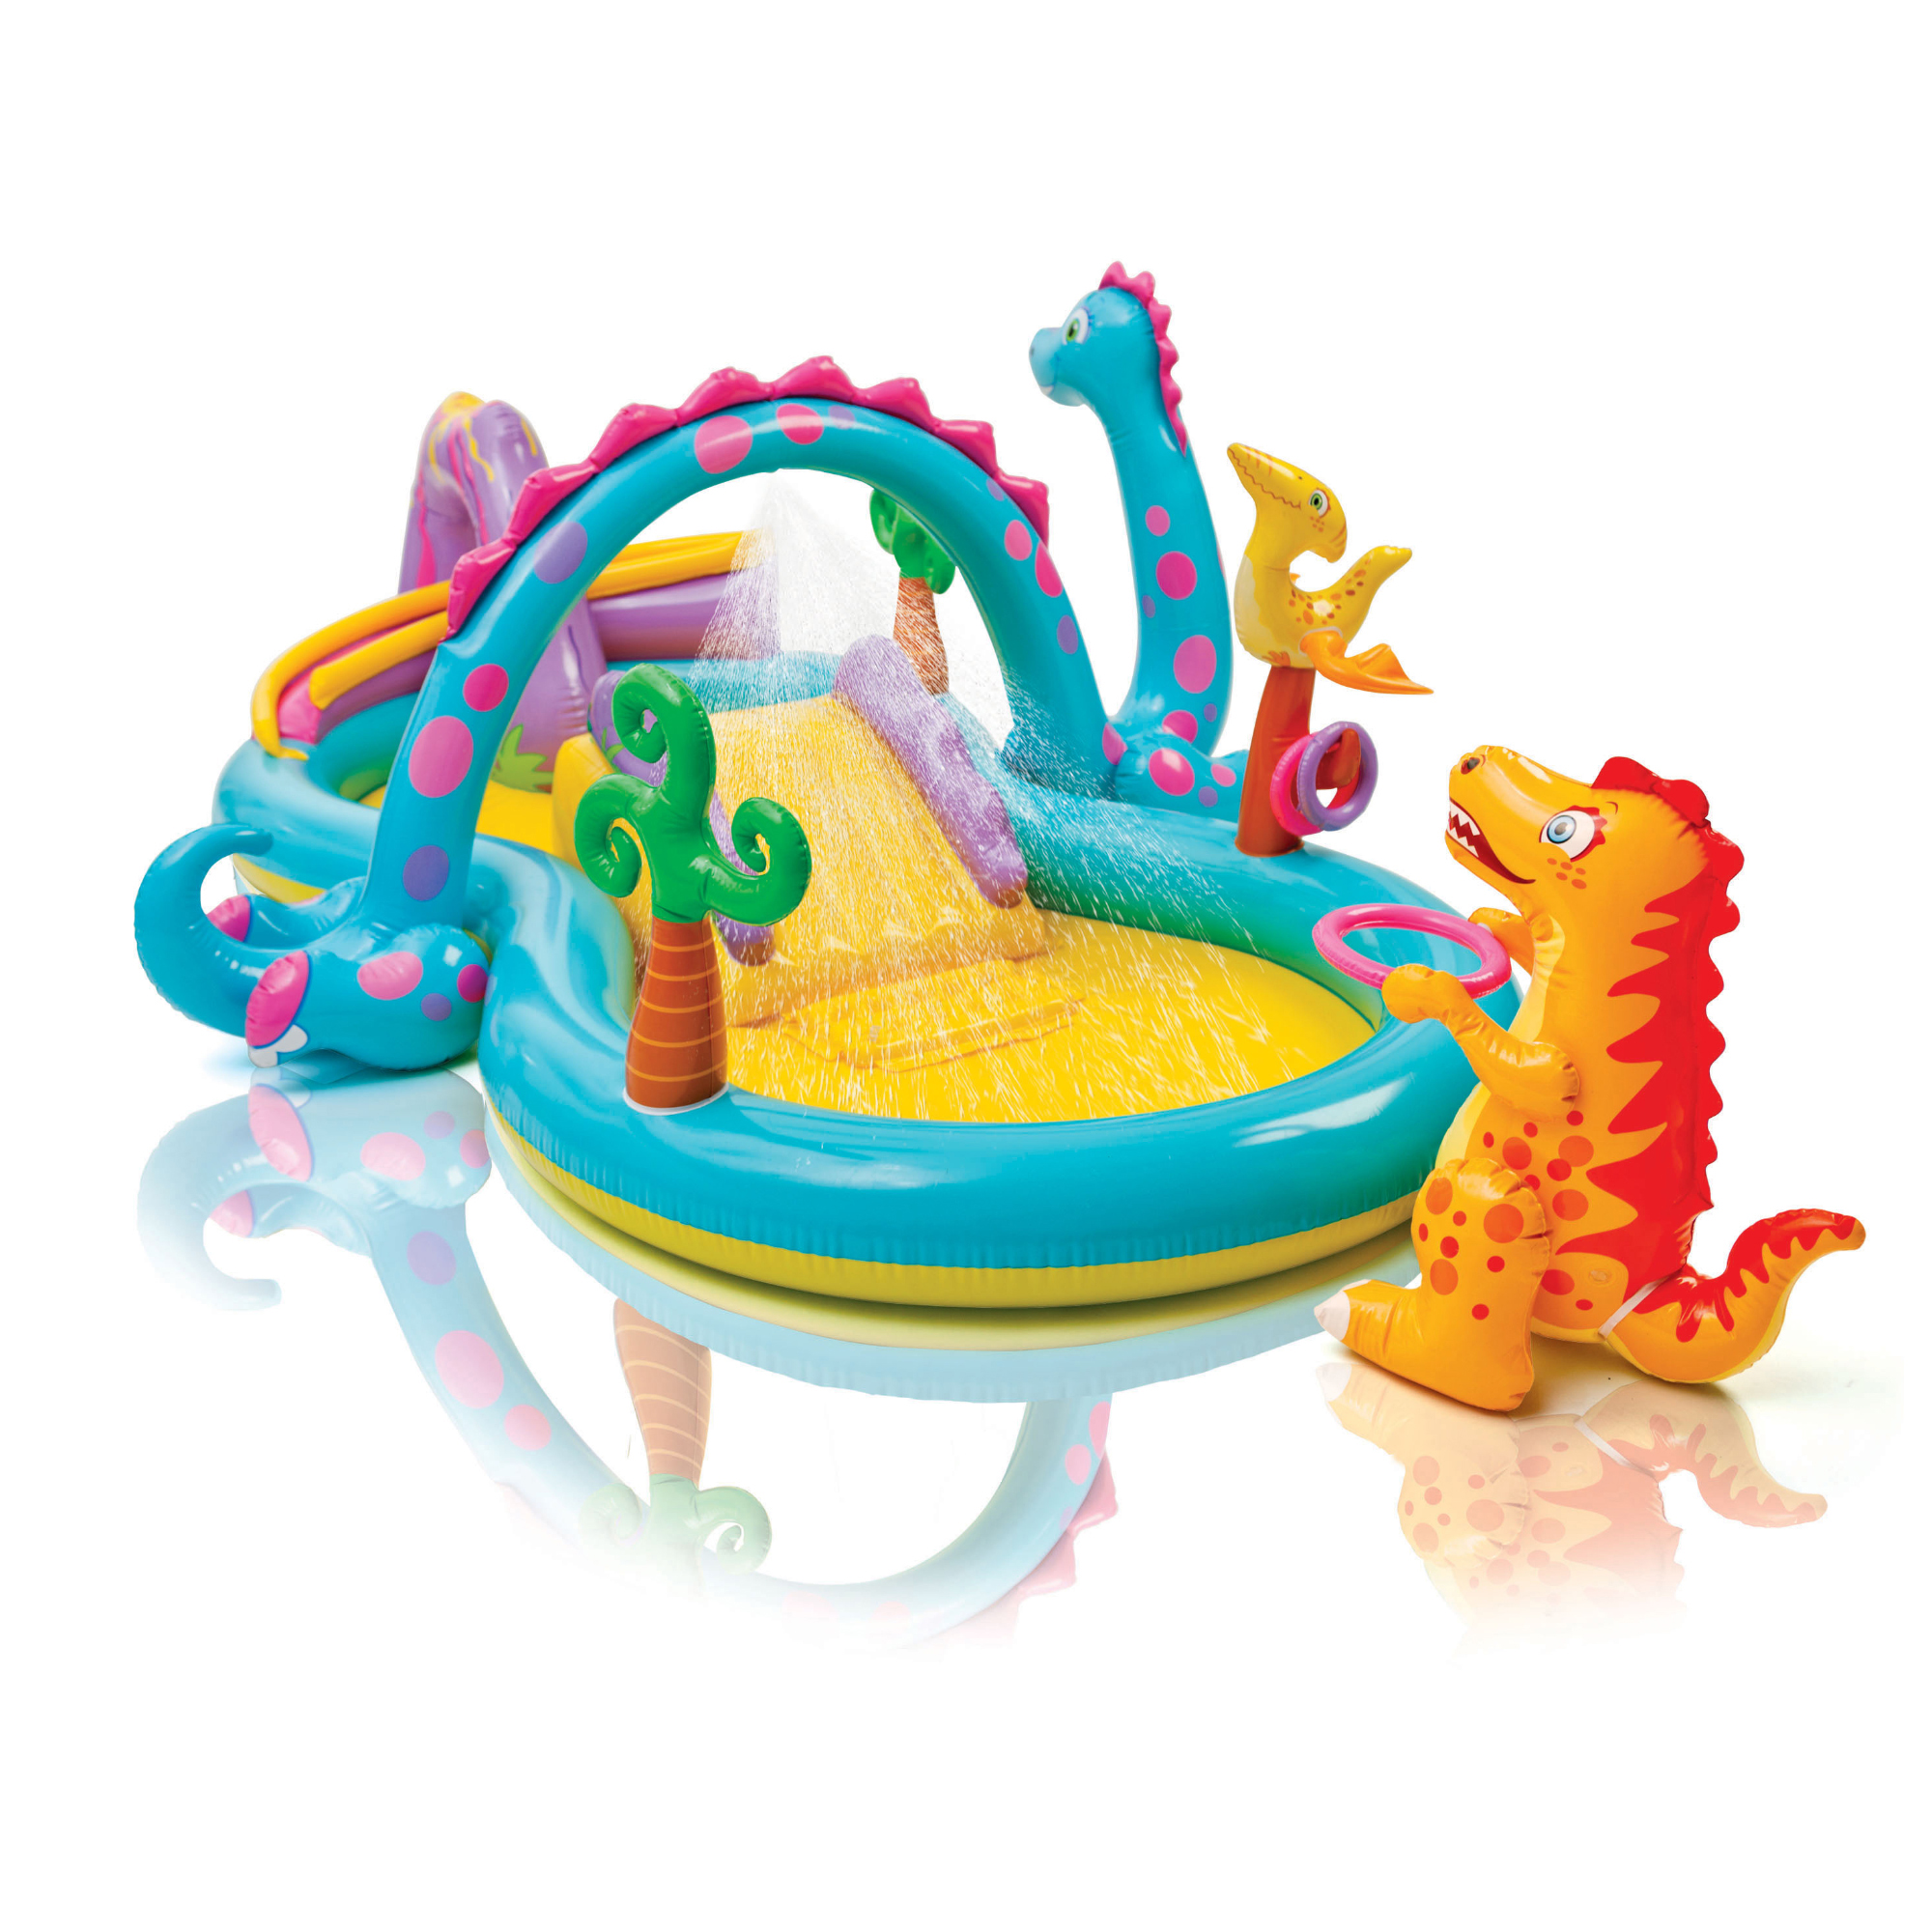 Intex 11ft x 7.5ft x 44in Dinoland Play Center Kiddie Inflatable Swimming Pool - image 1 of 6